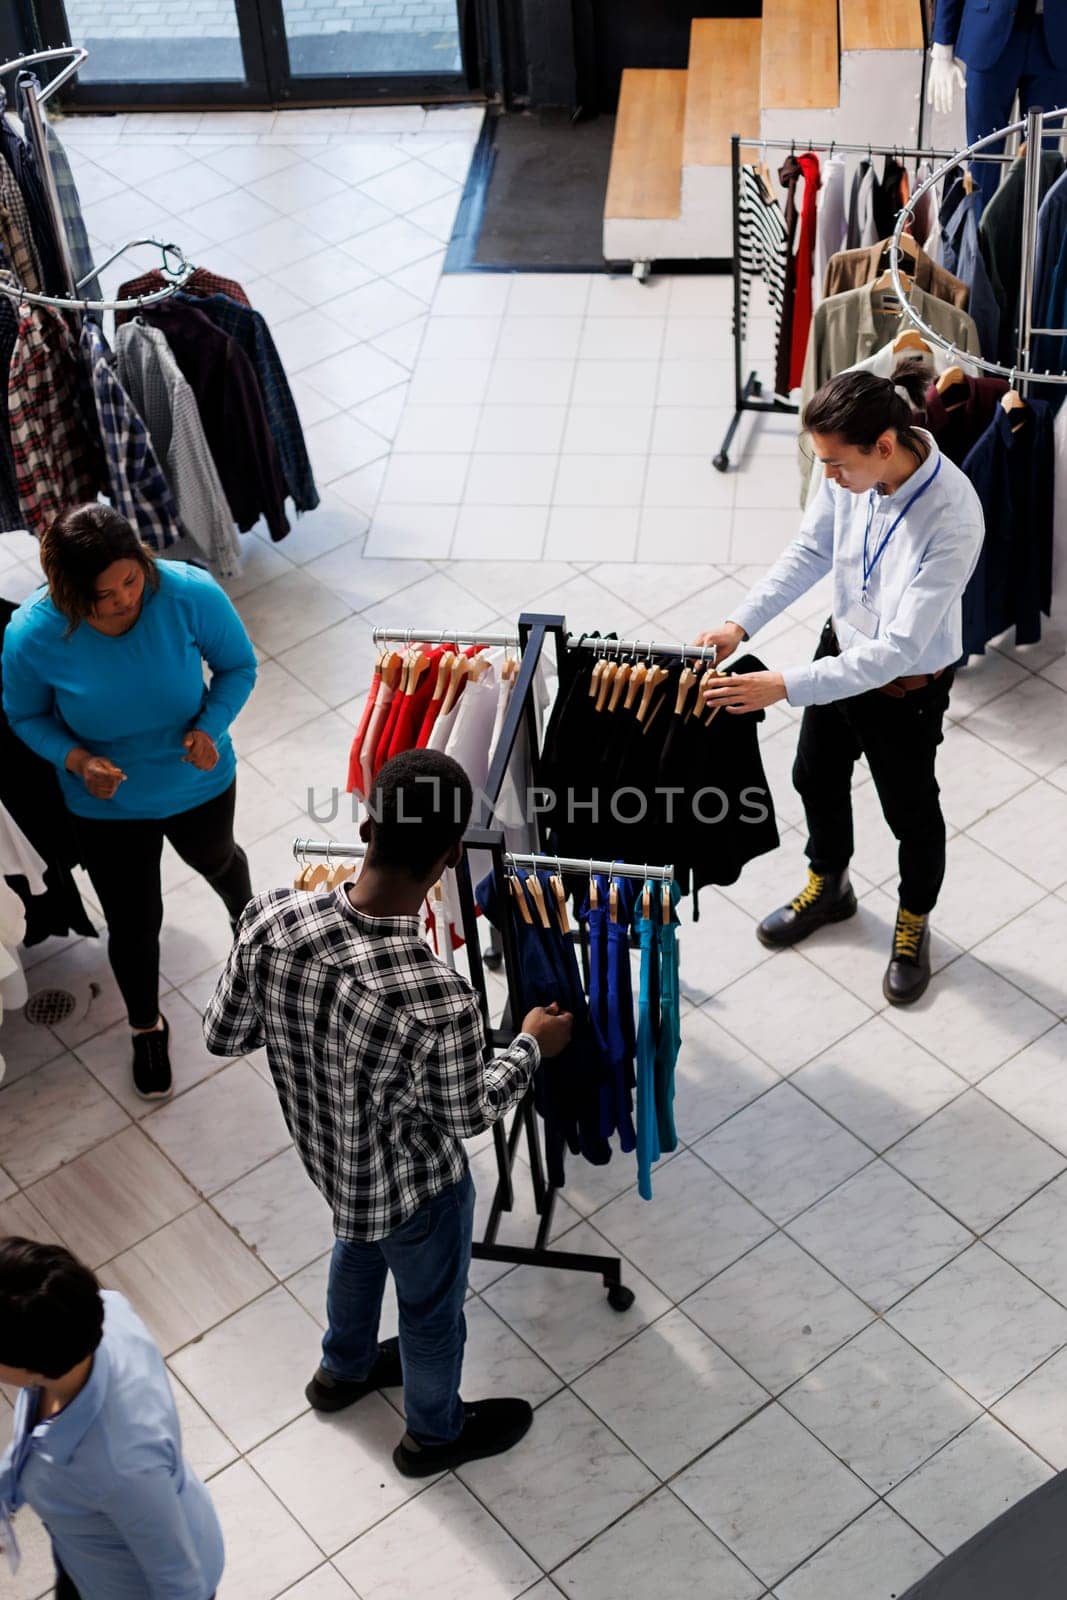 Stylish people shopping for casual wear by DCStudio